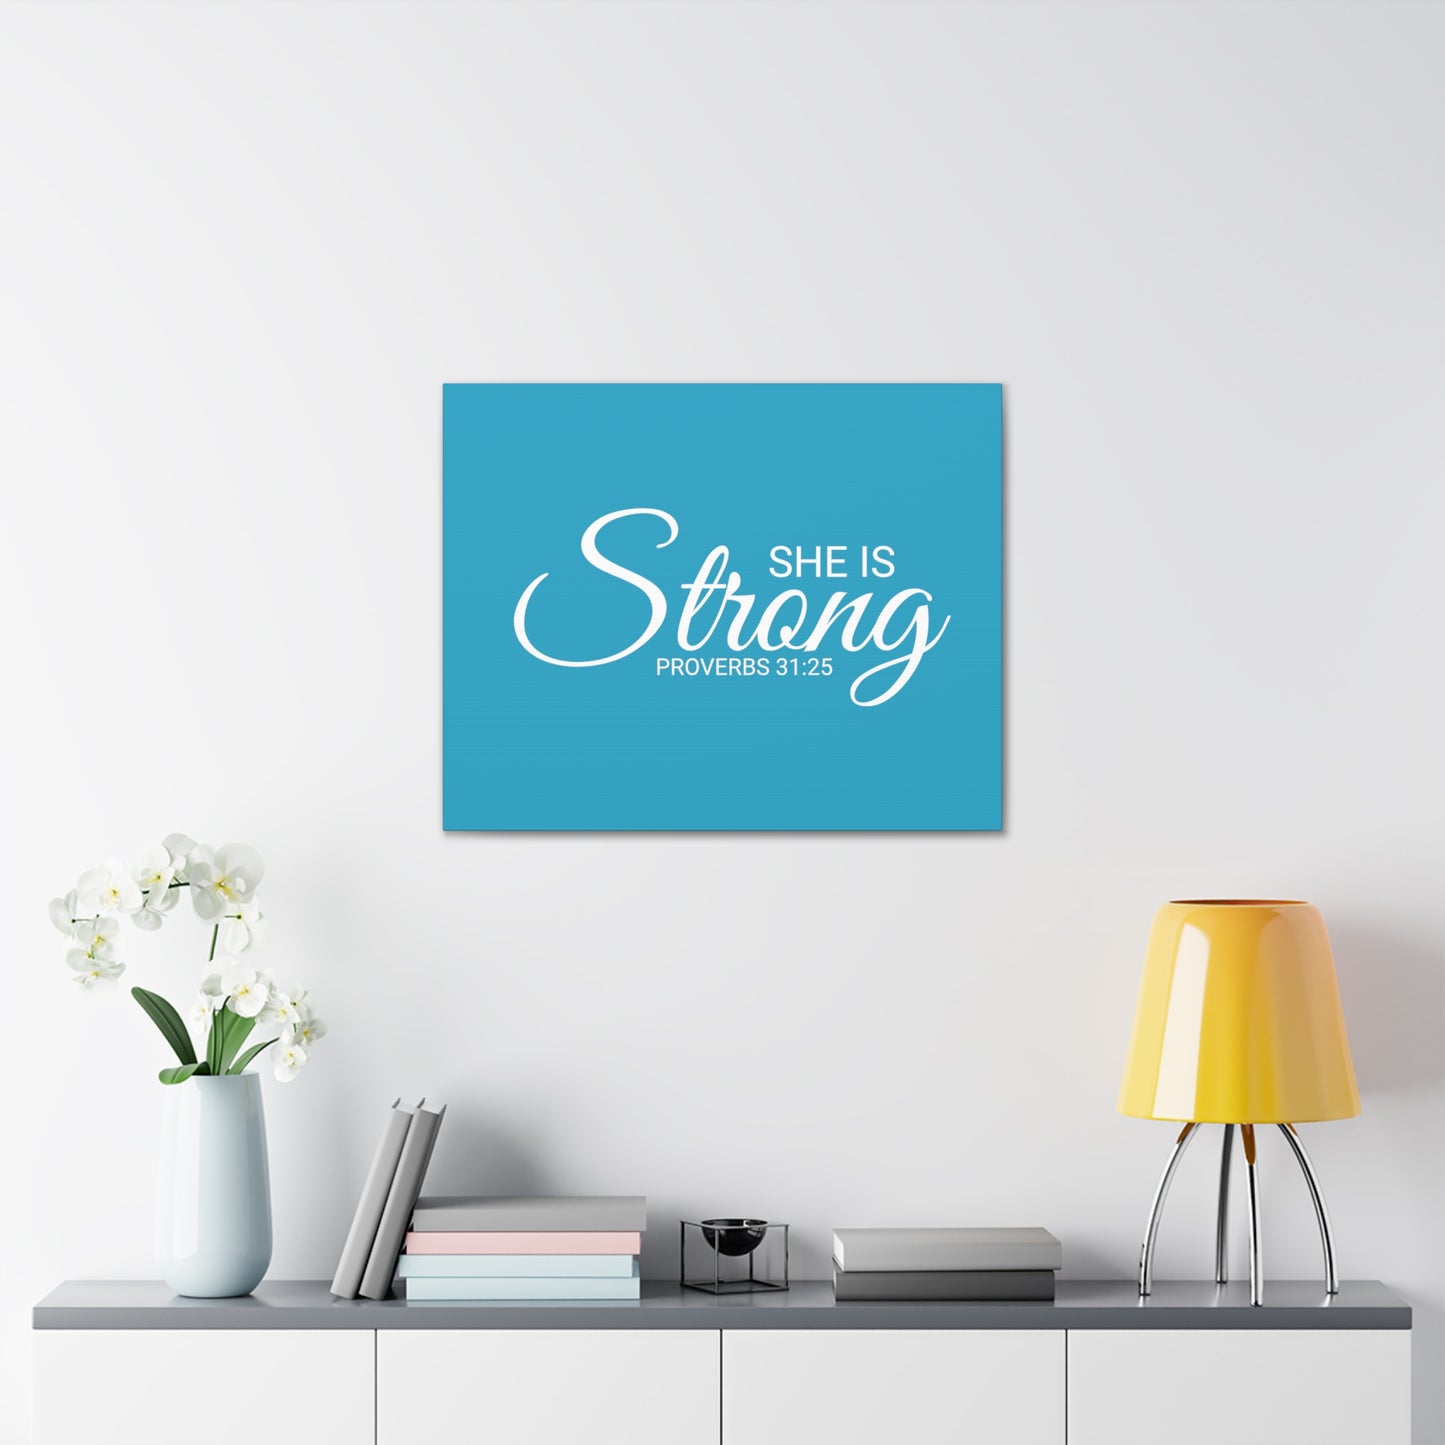 Christian Wall Art "She is Strong" Verse Proverbs 31:25 Ready to Hang Unframed